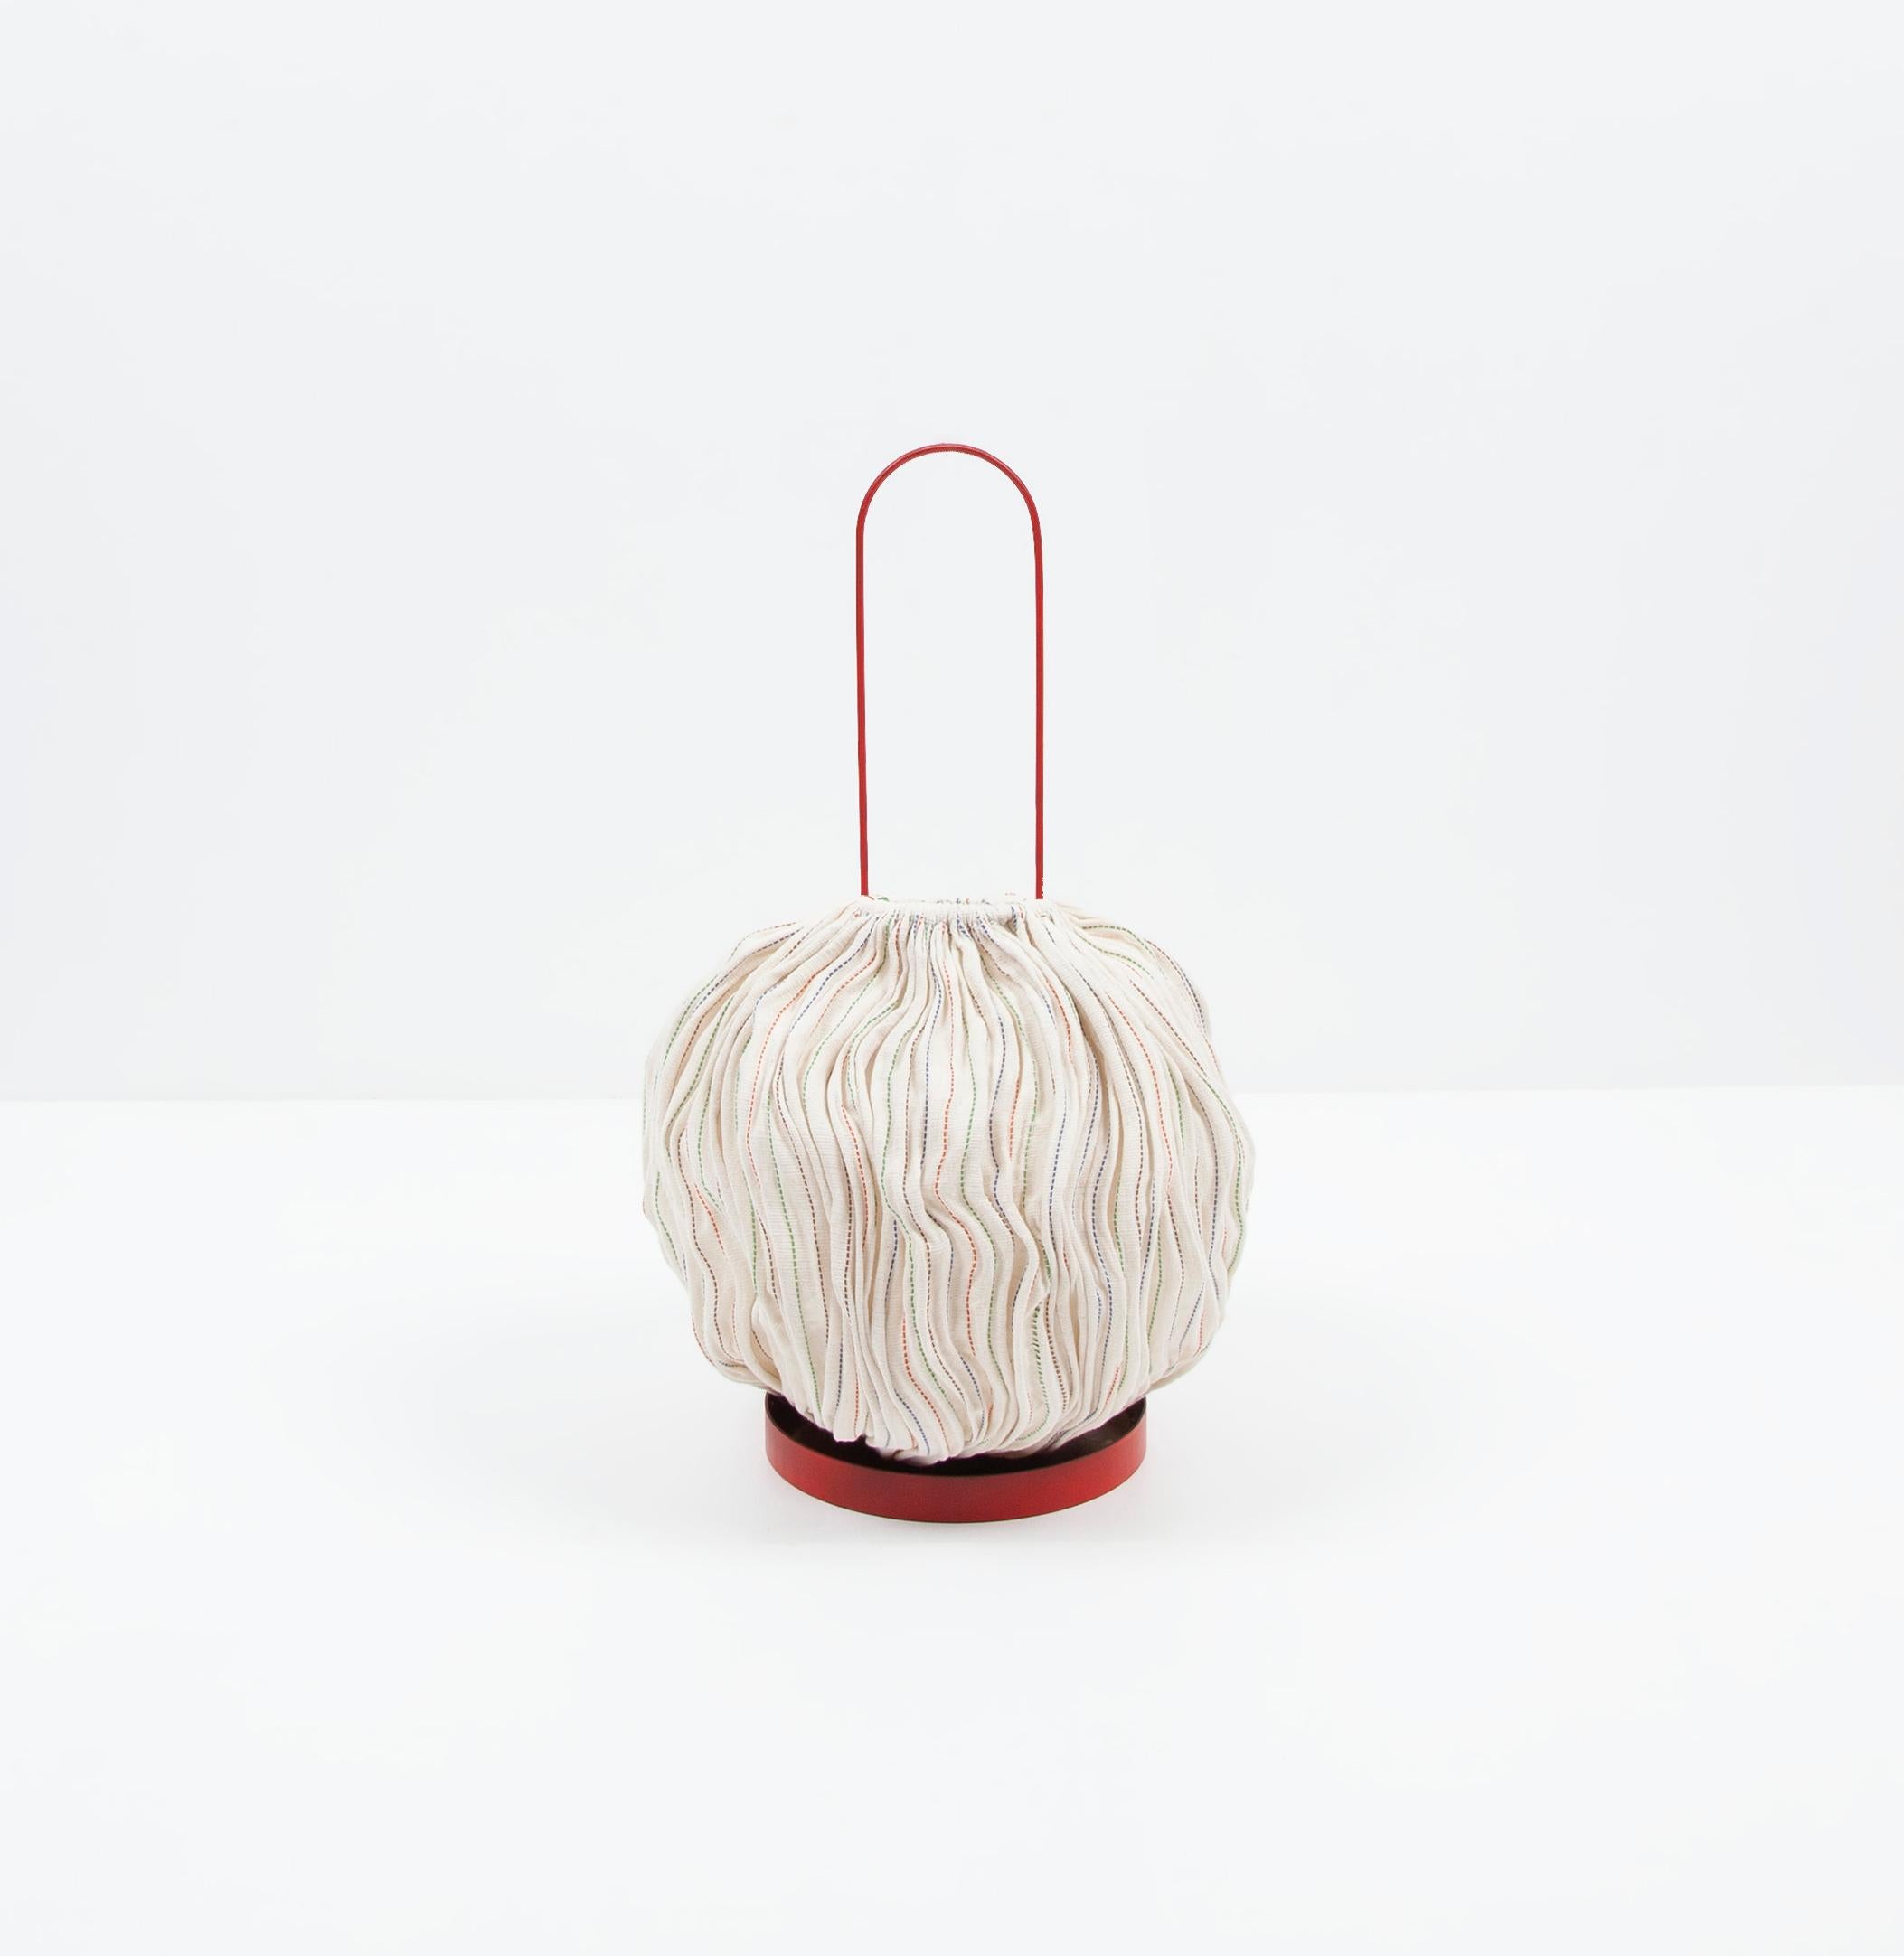 The Nebule lamp with a metal base large is part of a lamps series made from handwoven cotton with recycled phone wire by the Ethiopian cooperative ShimenaWeavingFriendships in Arba Minch.

The weaving of recycled wires and cotton results in a soft,